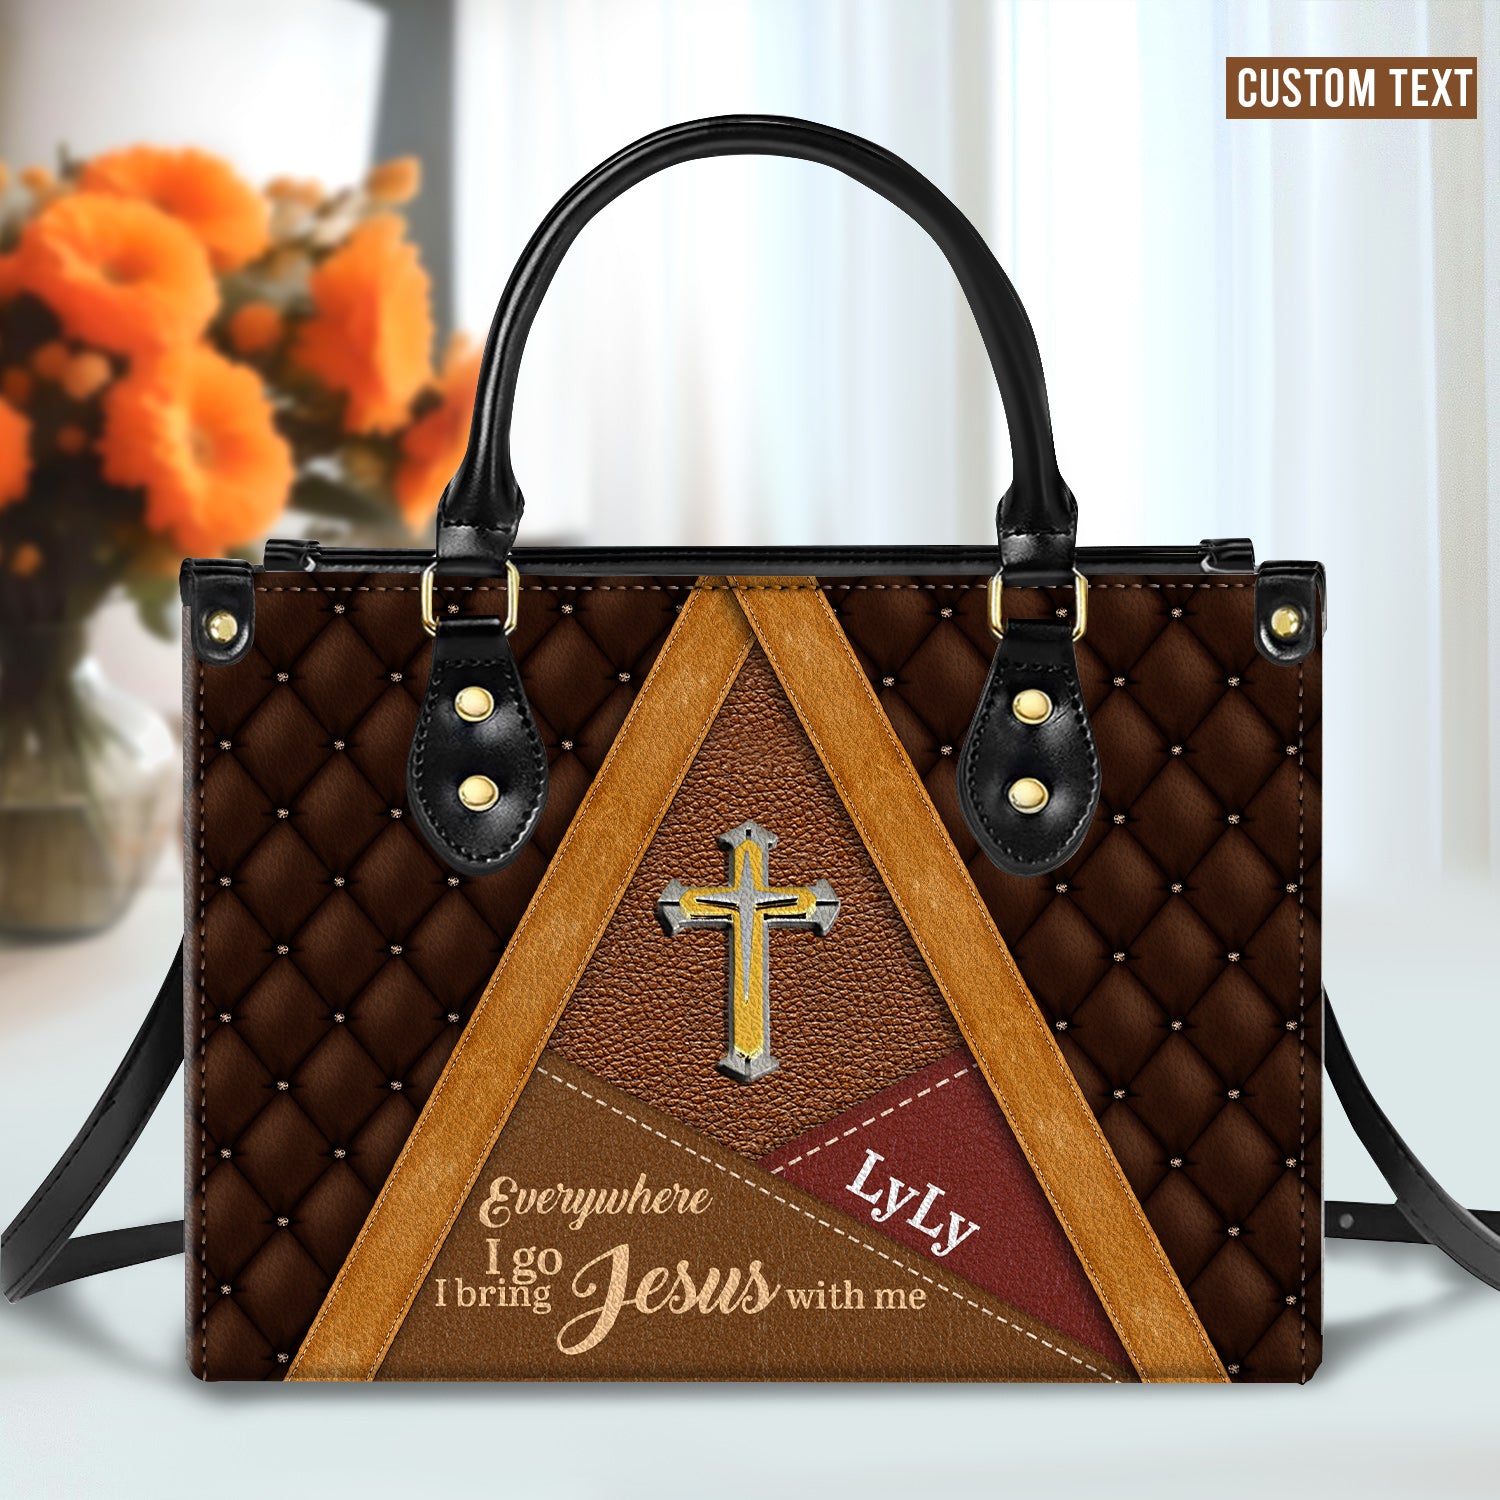 Everywhere I Go, I Bring Jesus With Me Personalized Leather Handbag Christian Gifts Bible Verses Religious Gifts